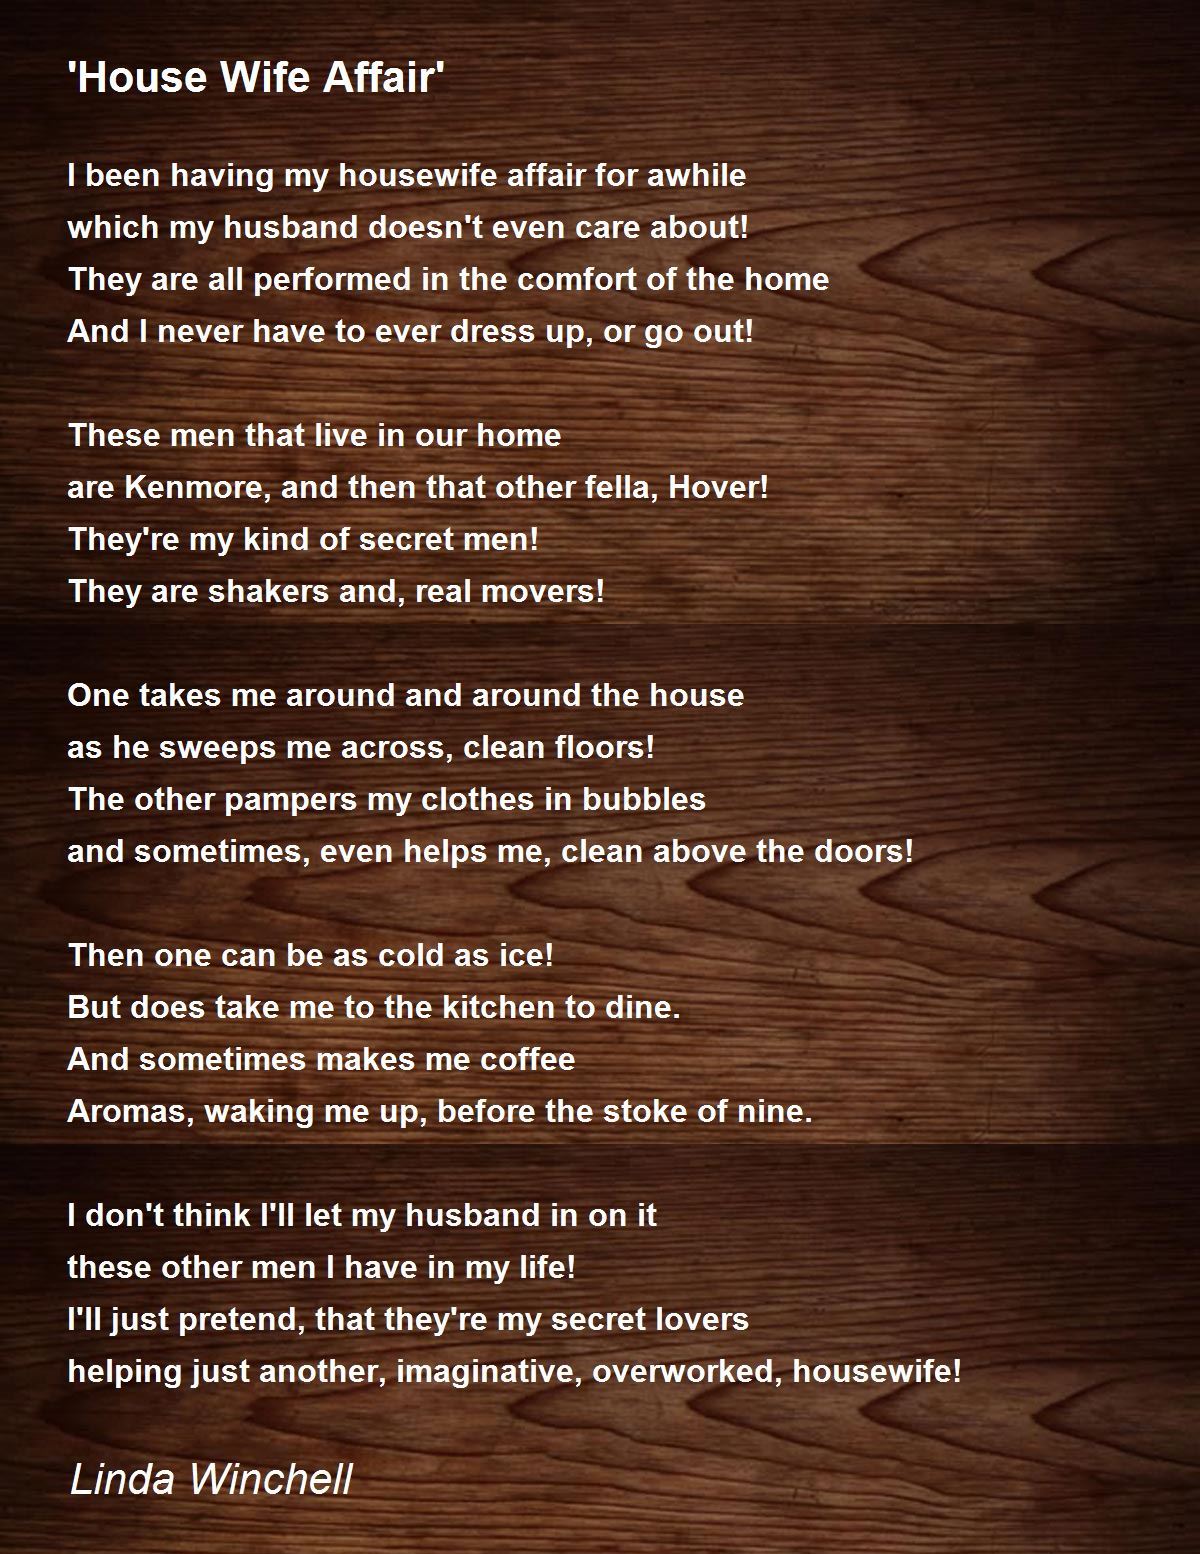 House Wife Affair Poem by Linda Winchell image